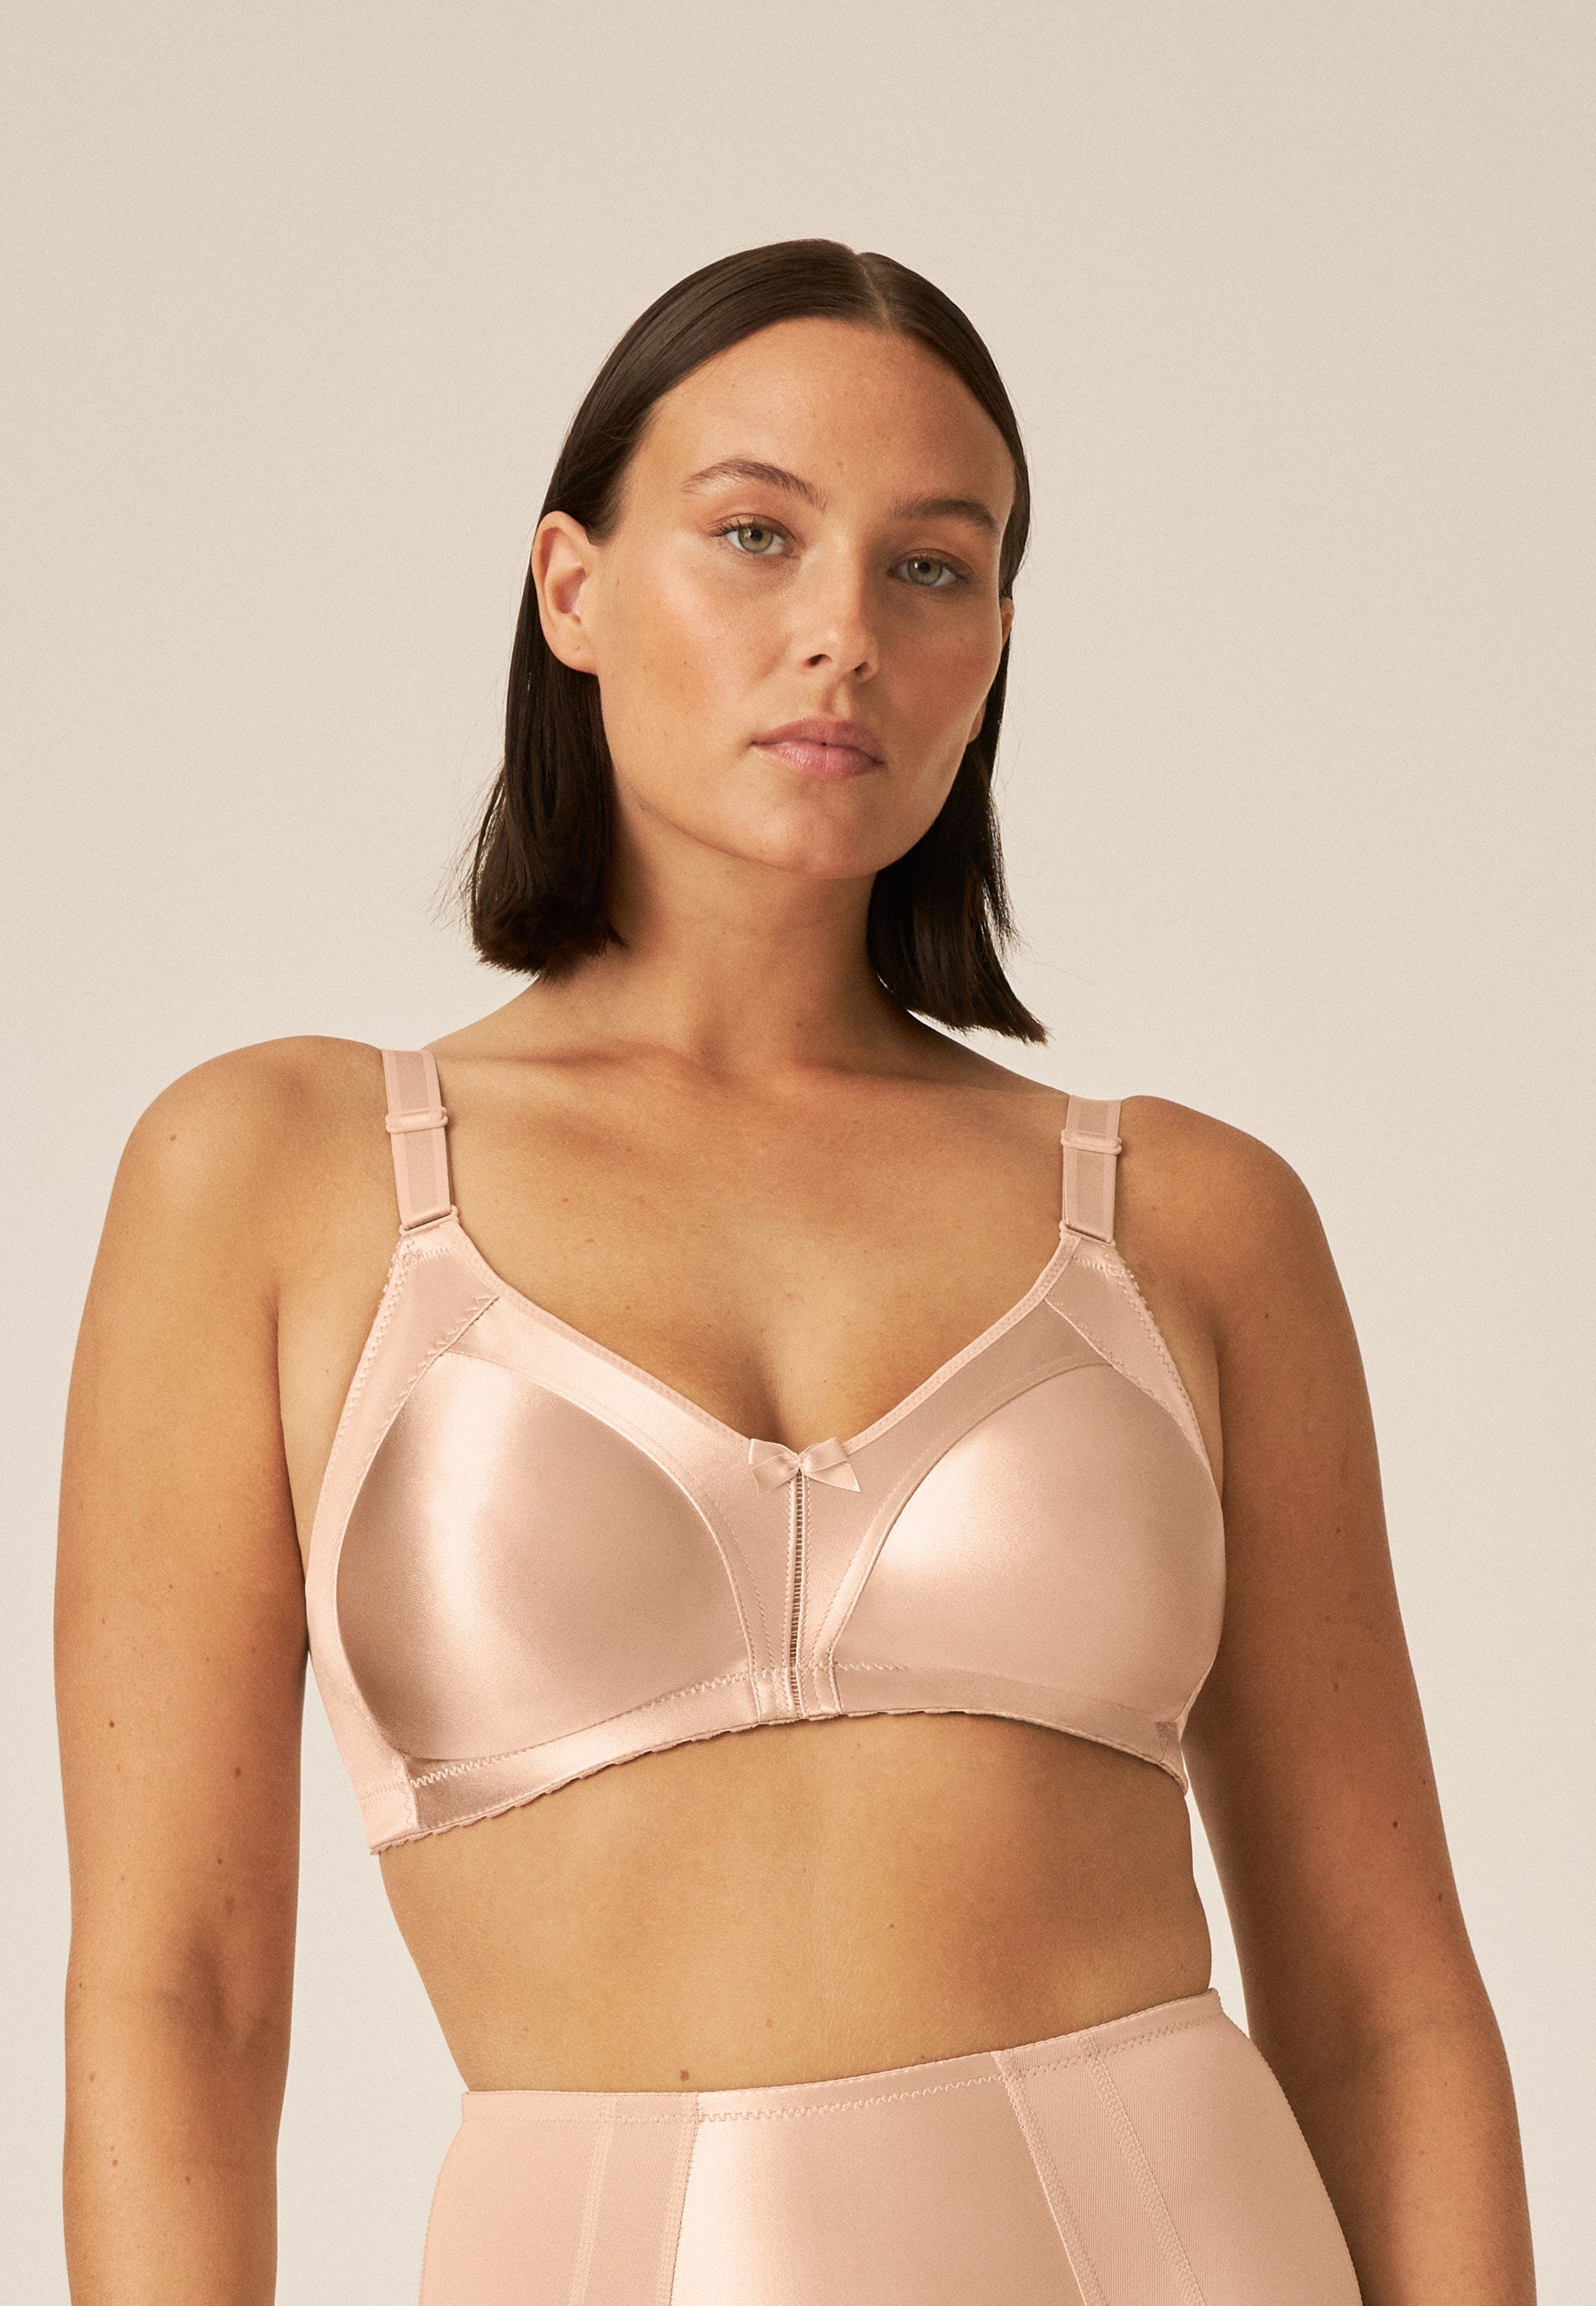 Minimizer and Side Smoother Bra with Lace - Light Beige